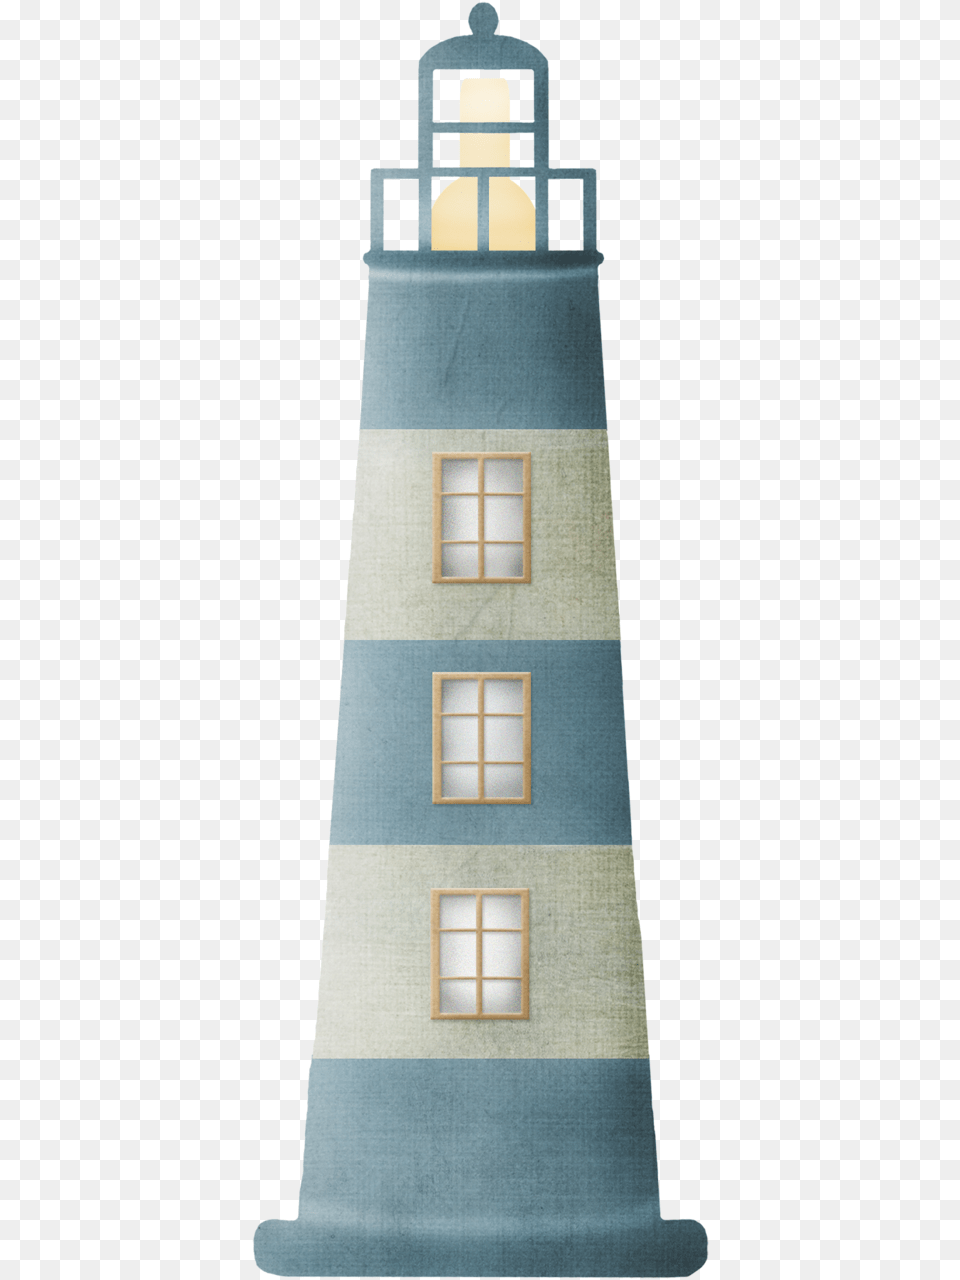 Wm Sp Lighthouse Lighthouse, Architecture, Building, Tower, Beacon Png Image